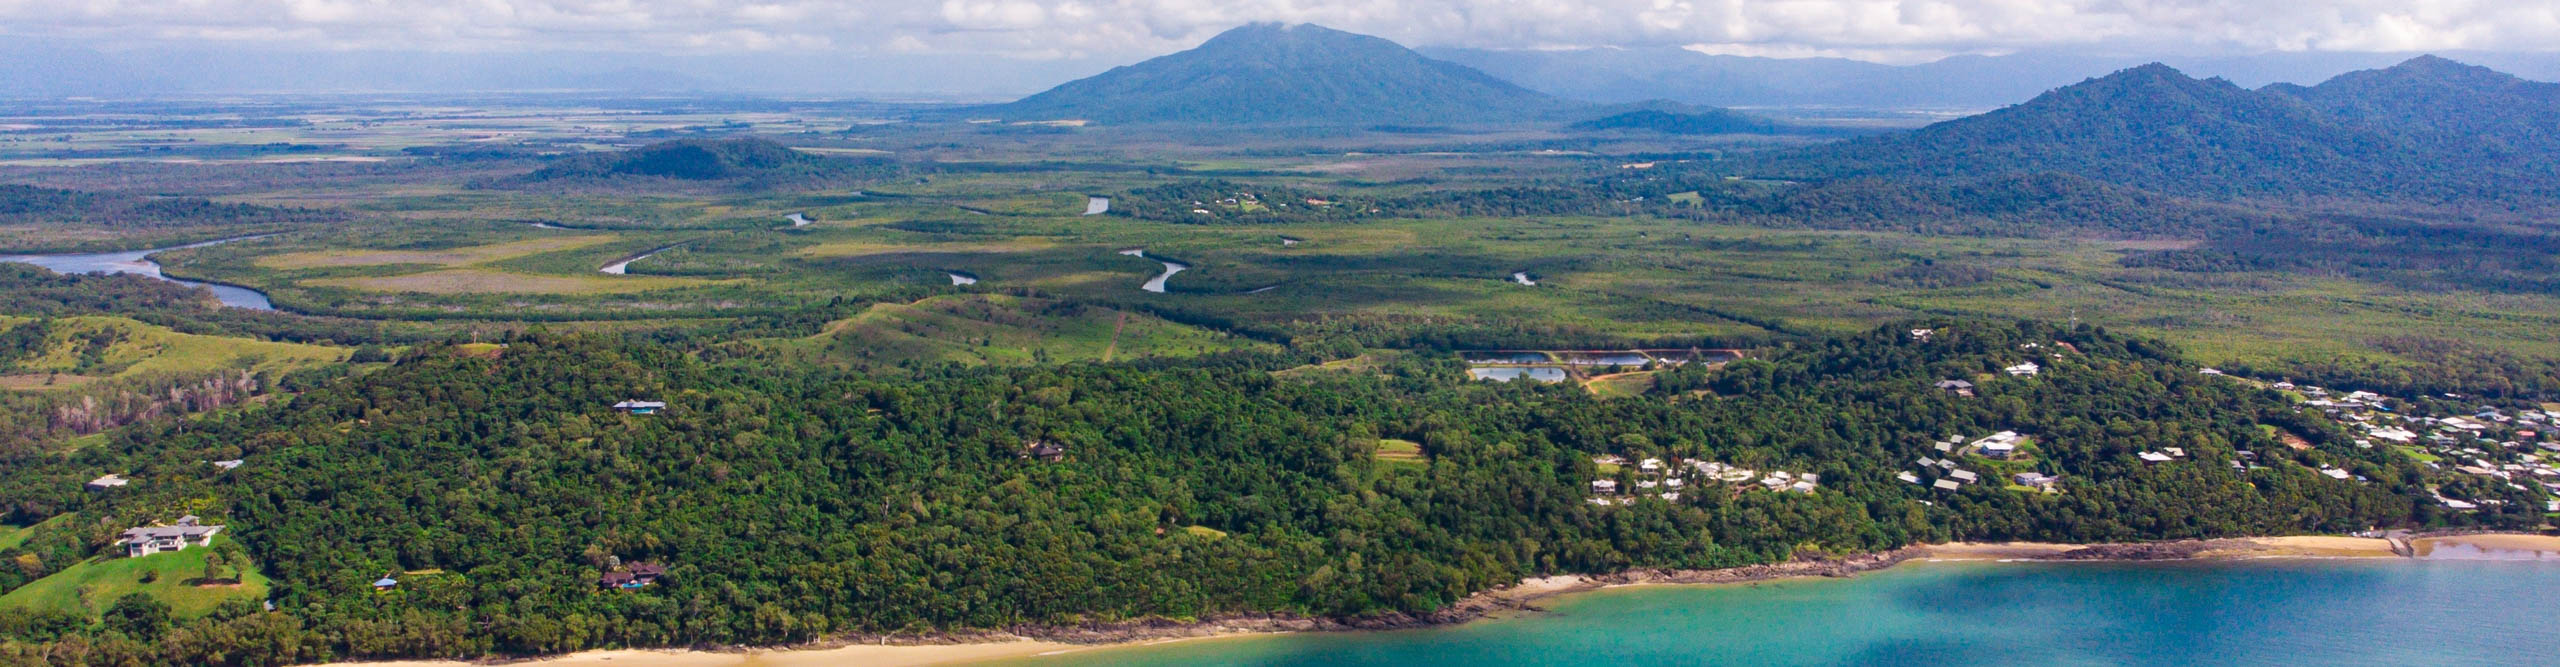 Aerial view of Mission beach on a cloudy day, with mountains in the distance, Queensland, Australia